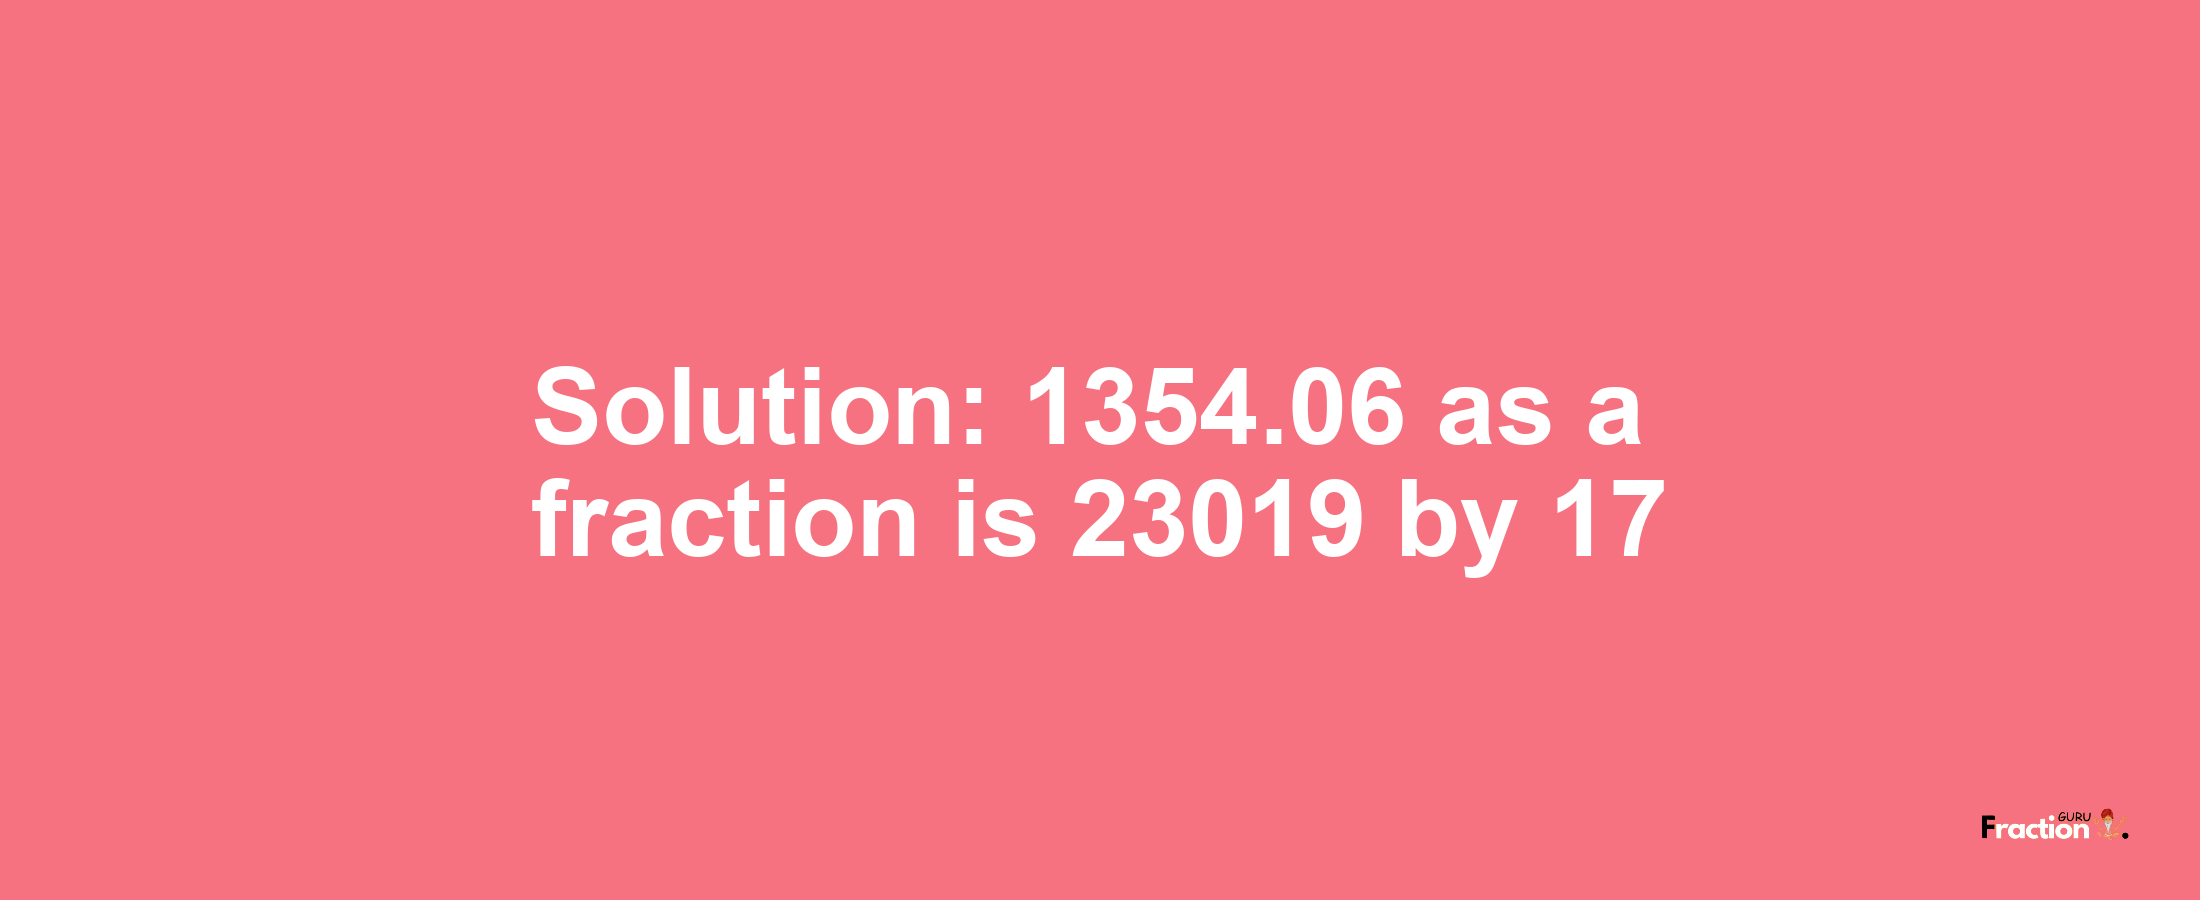 Solution:1354.06 as a fraction is 23019/17